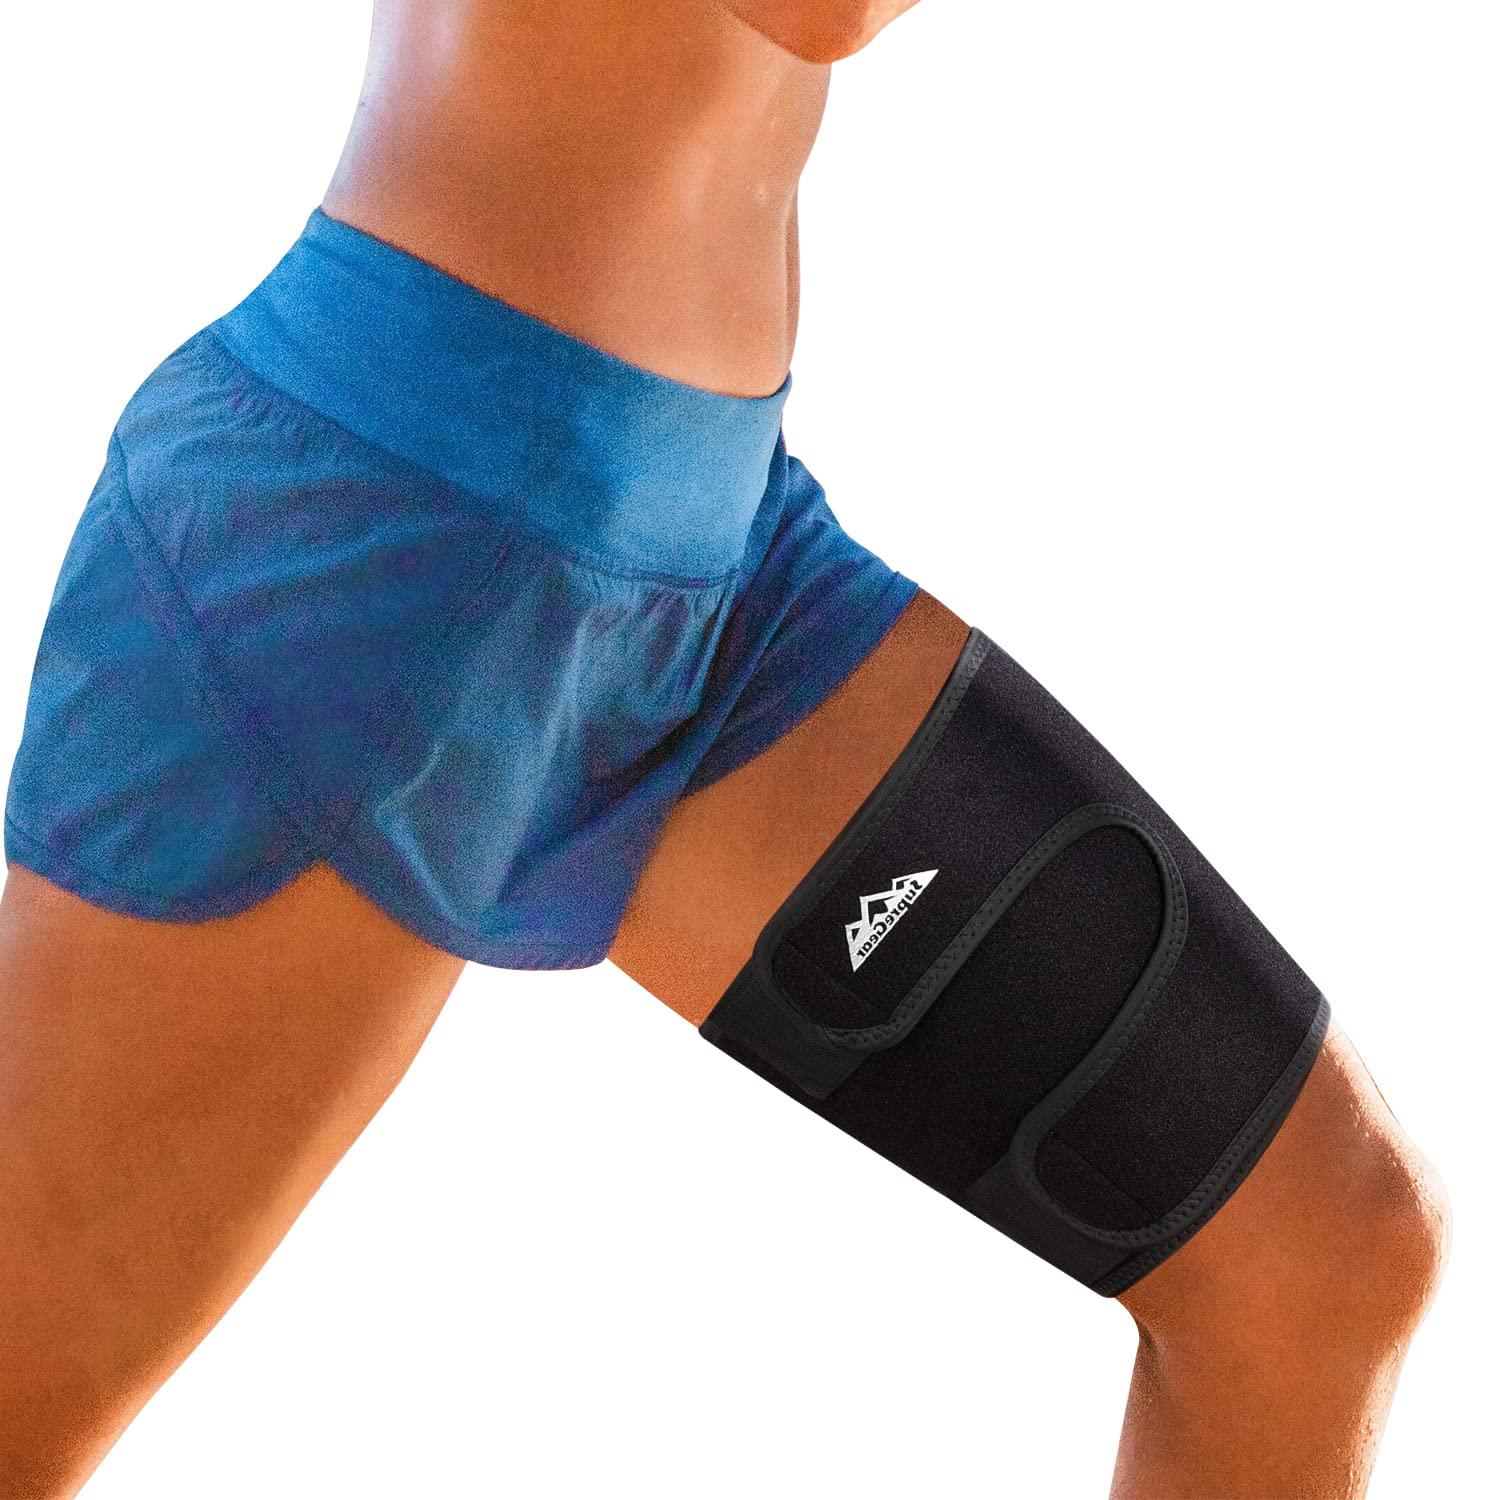  Adjustable Thigh Brace Support, Quadriceps Support and